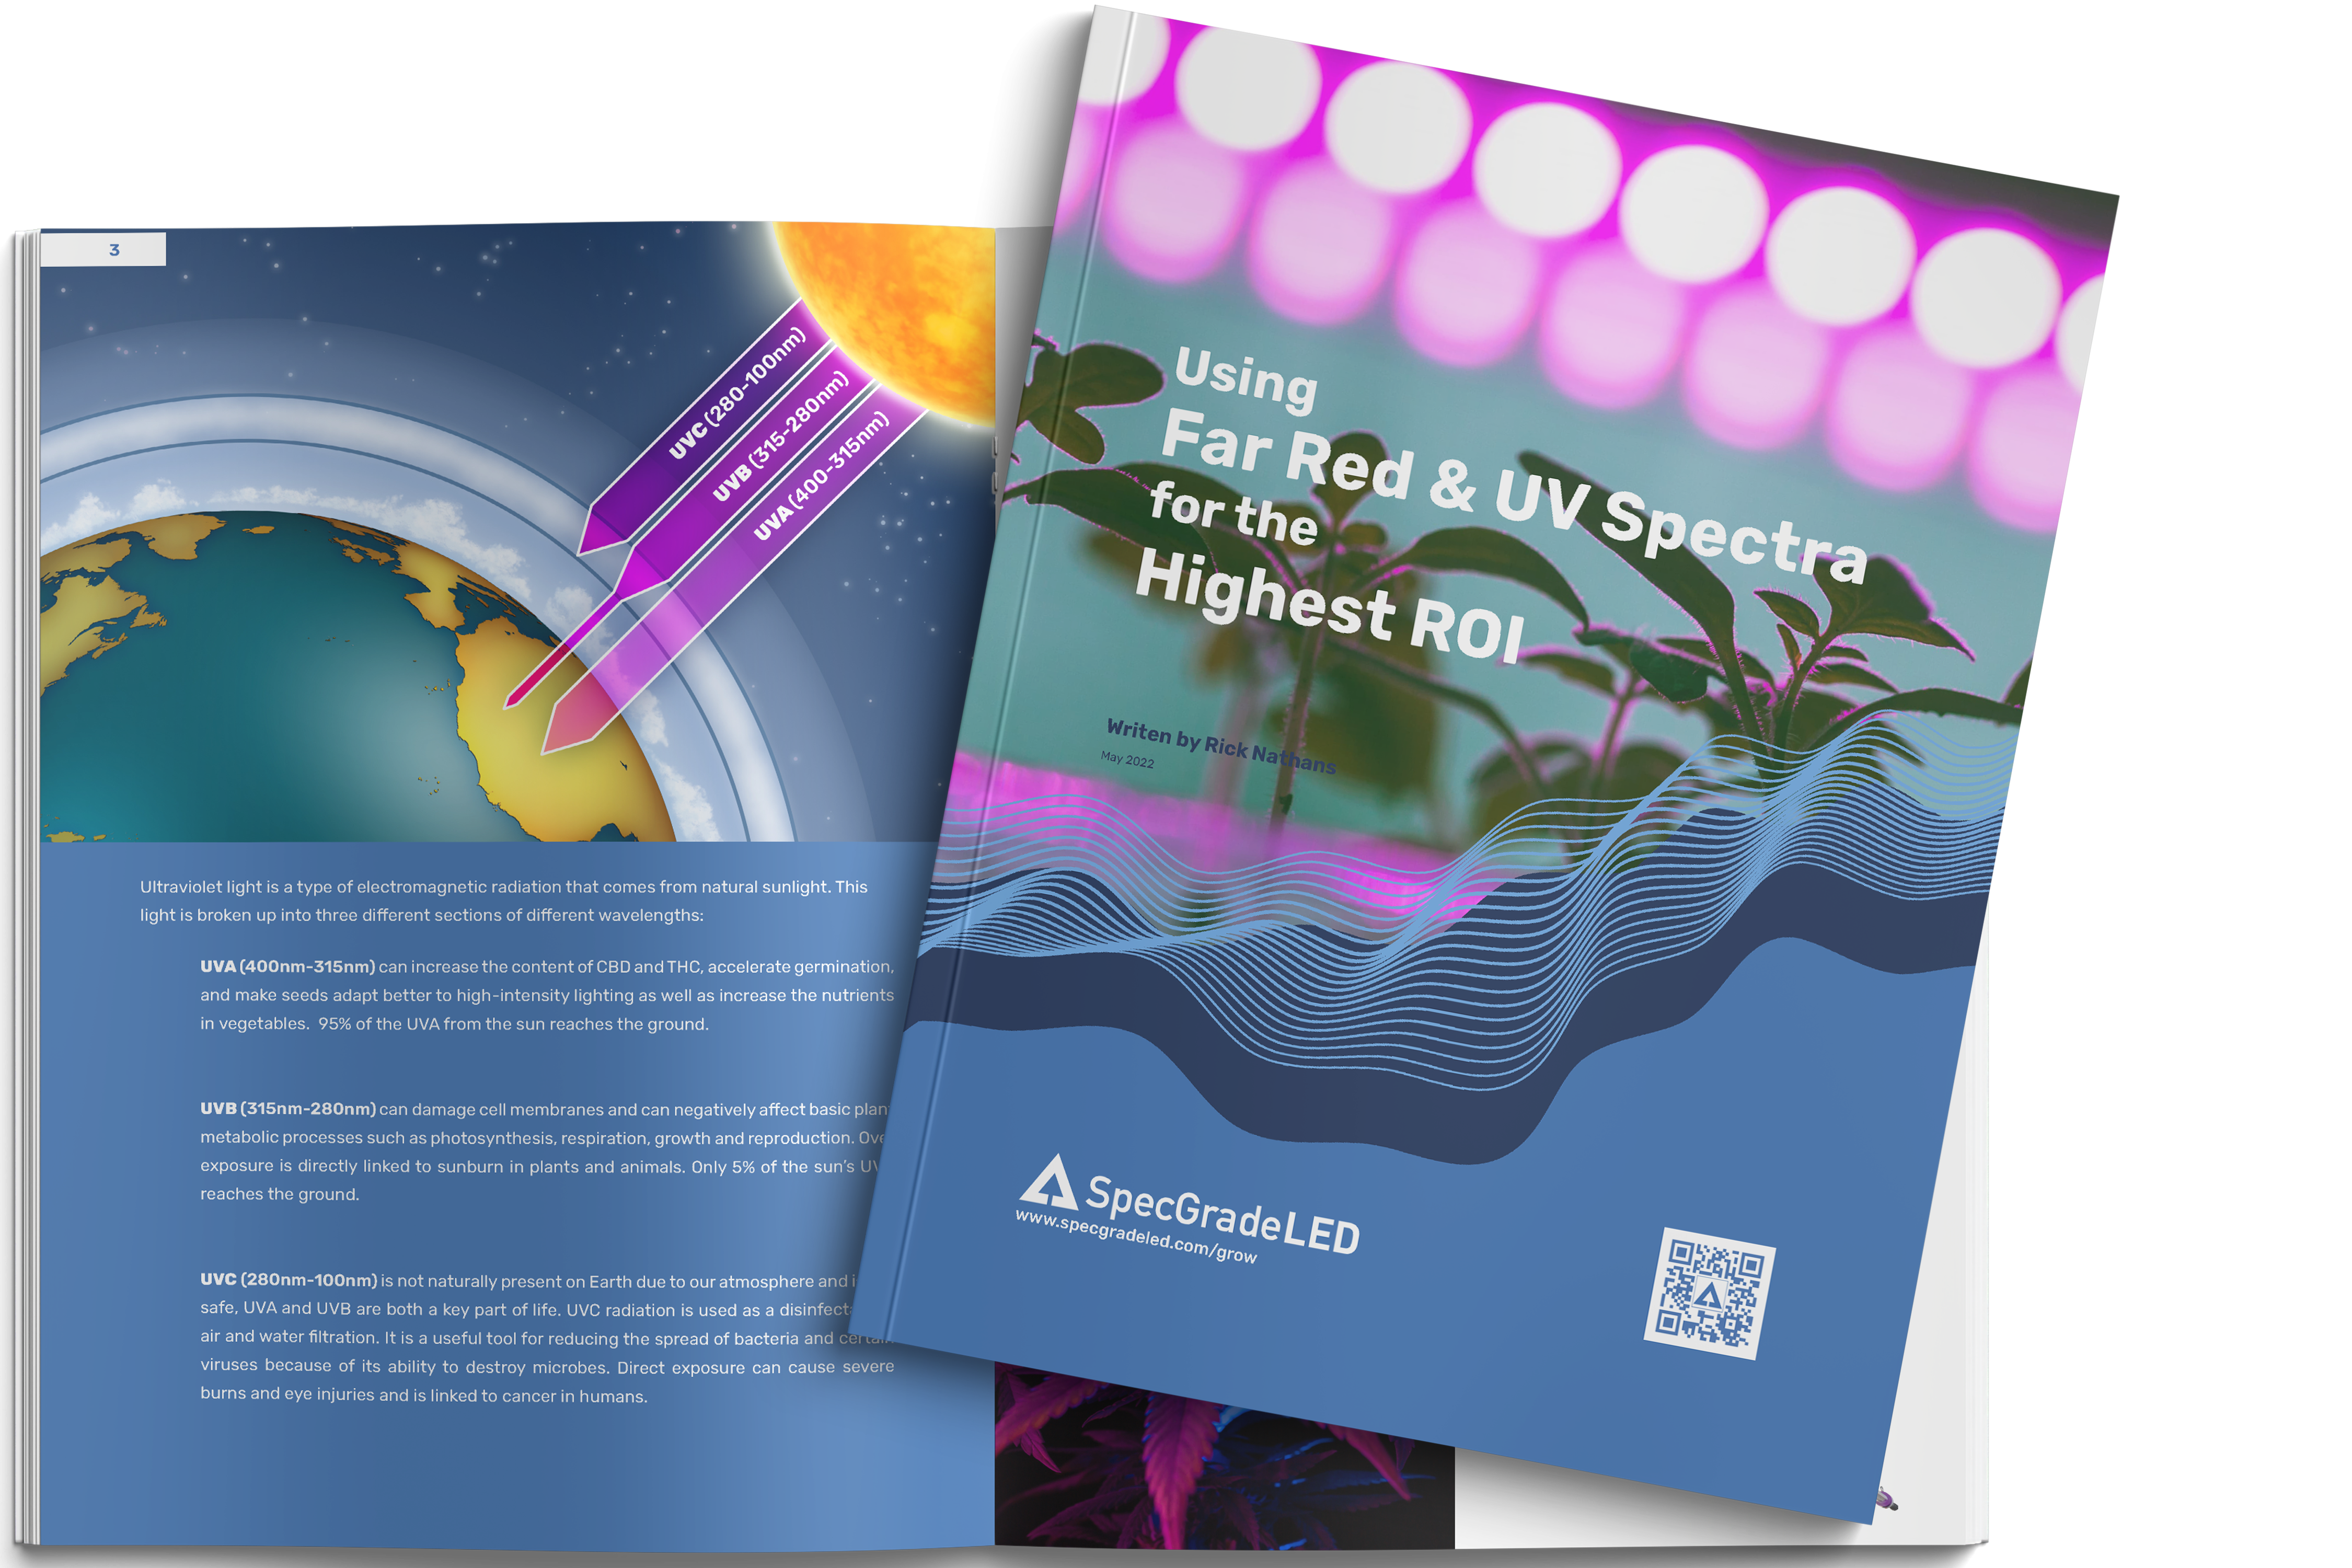 Using Far Red & UV Spectra for the Highest ROI cover and inside pages